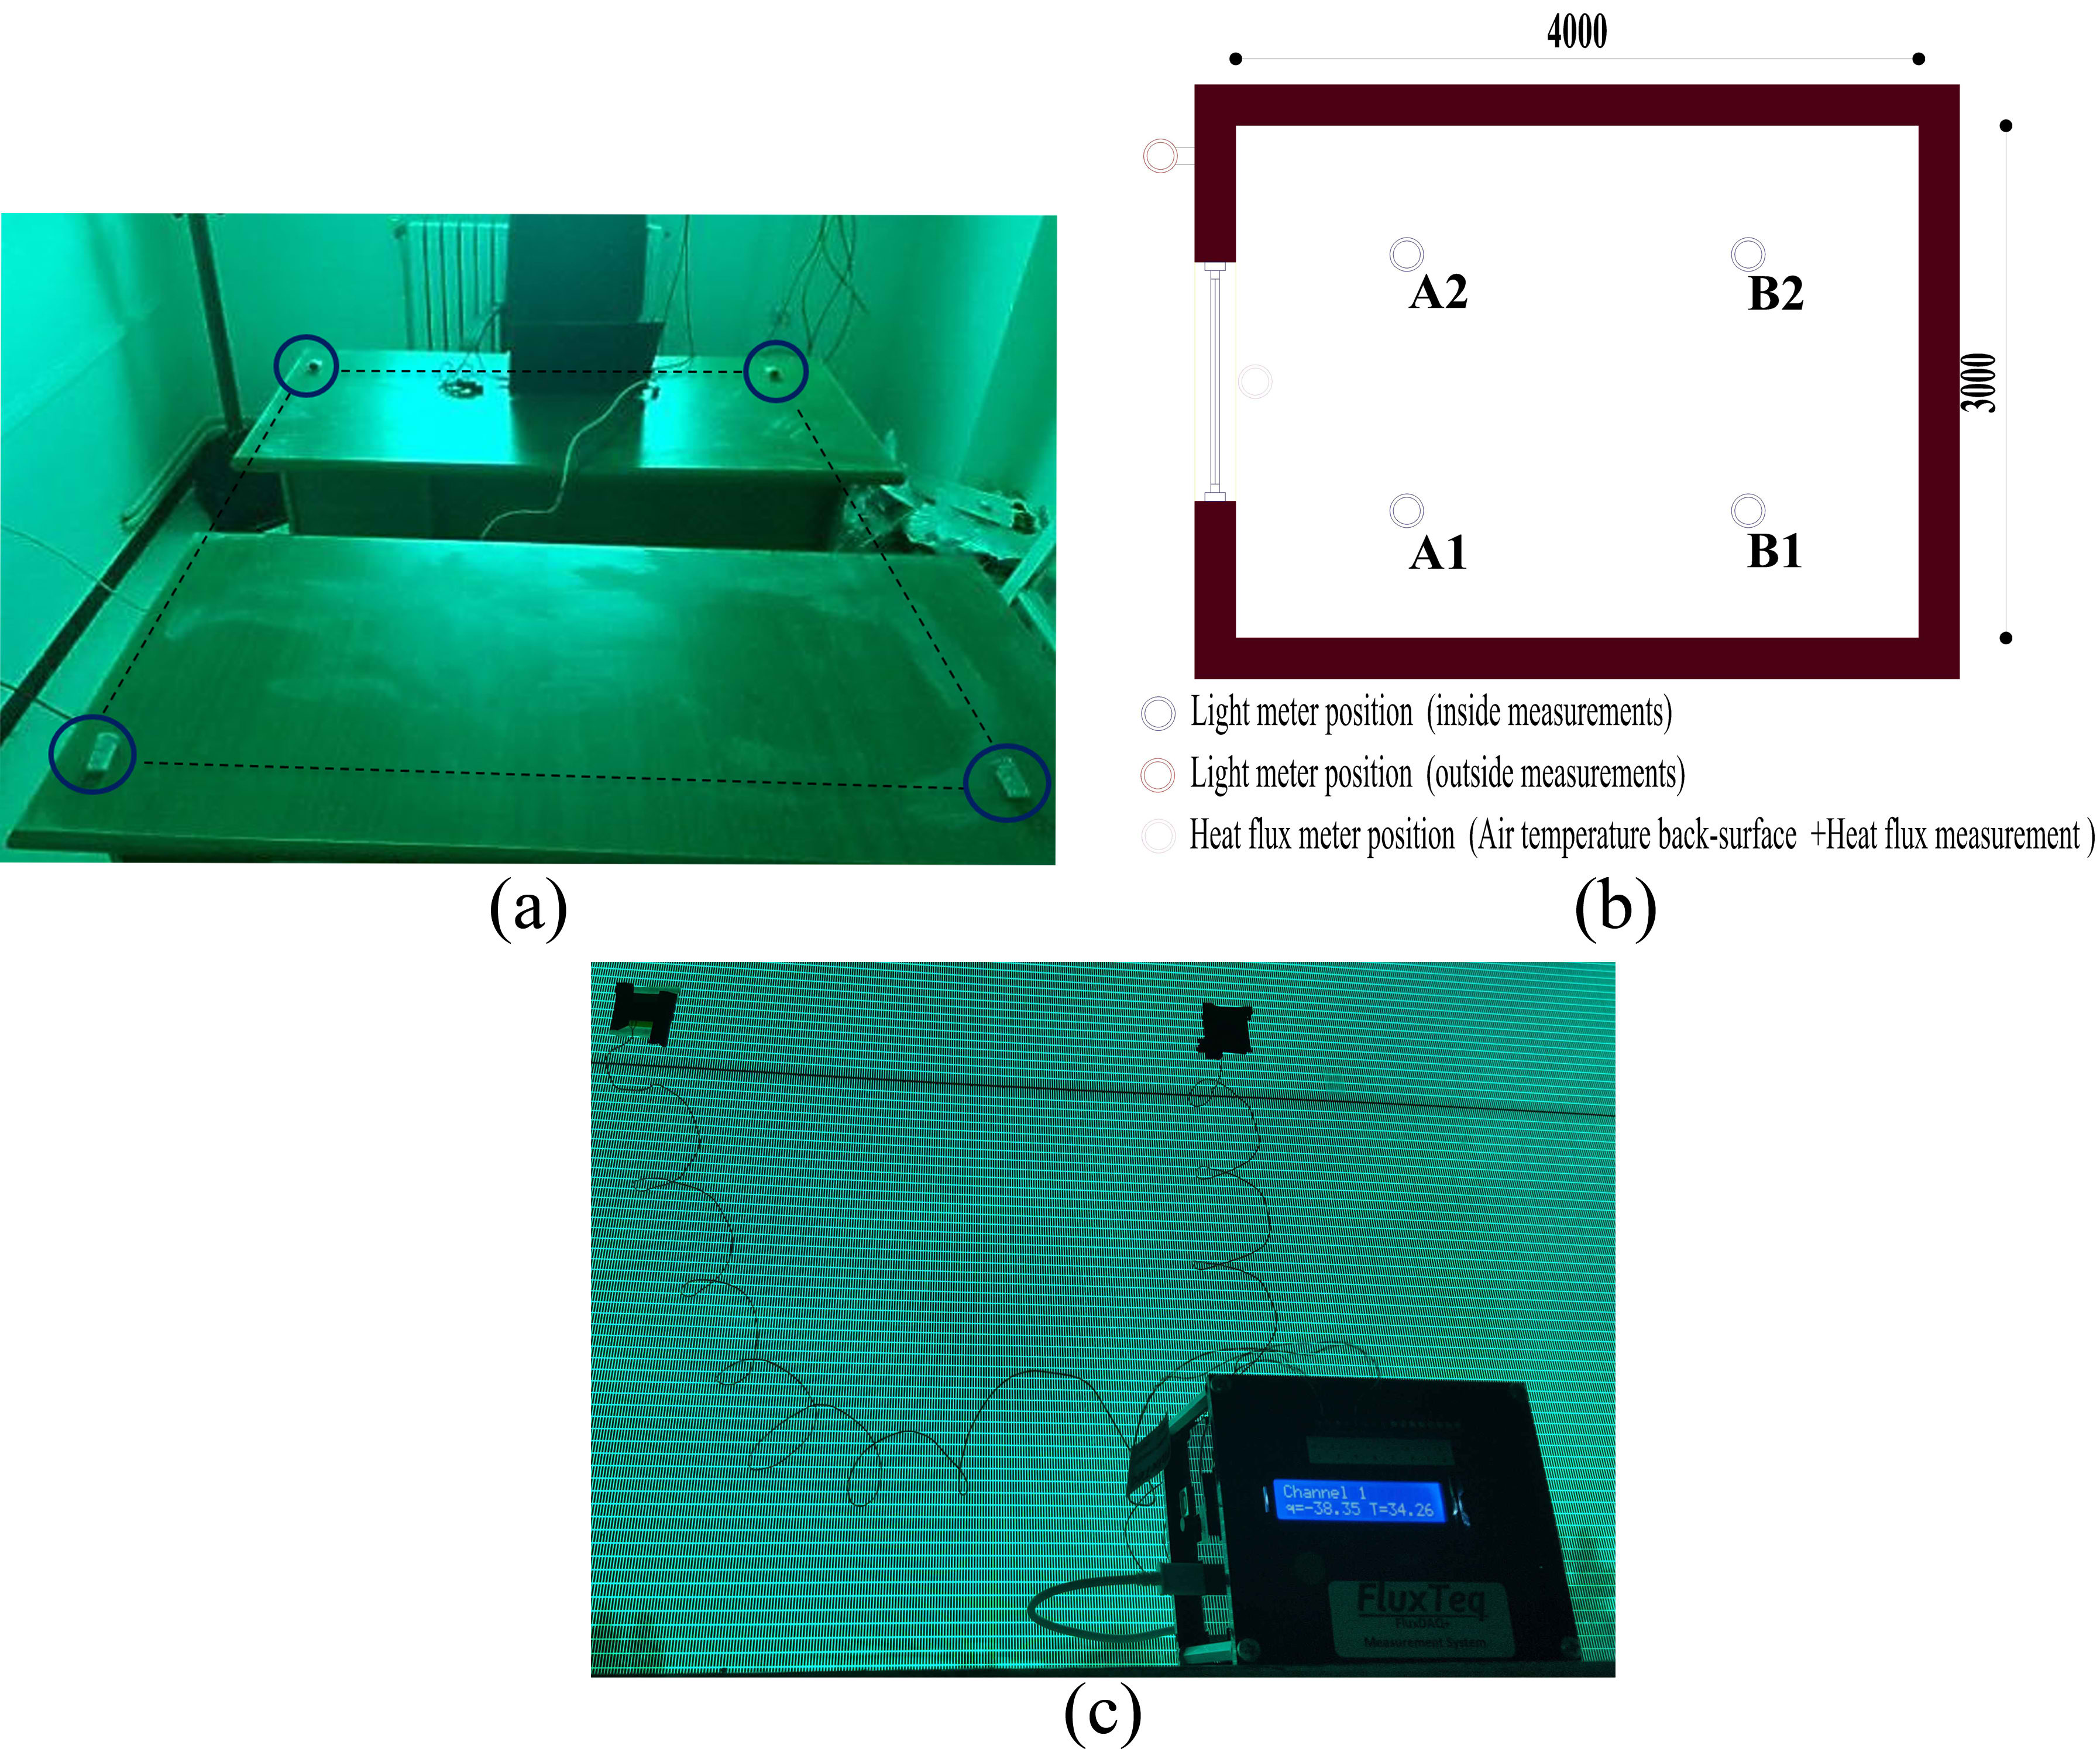 (a) Grids of measurements and sensor position, (b) Heat flux and air temperature position, and (c) FluxTeq data reader and heat flux sensor placed on an inside window surface.